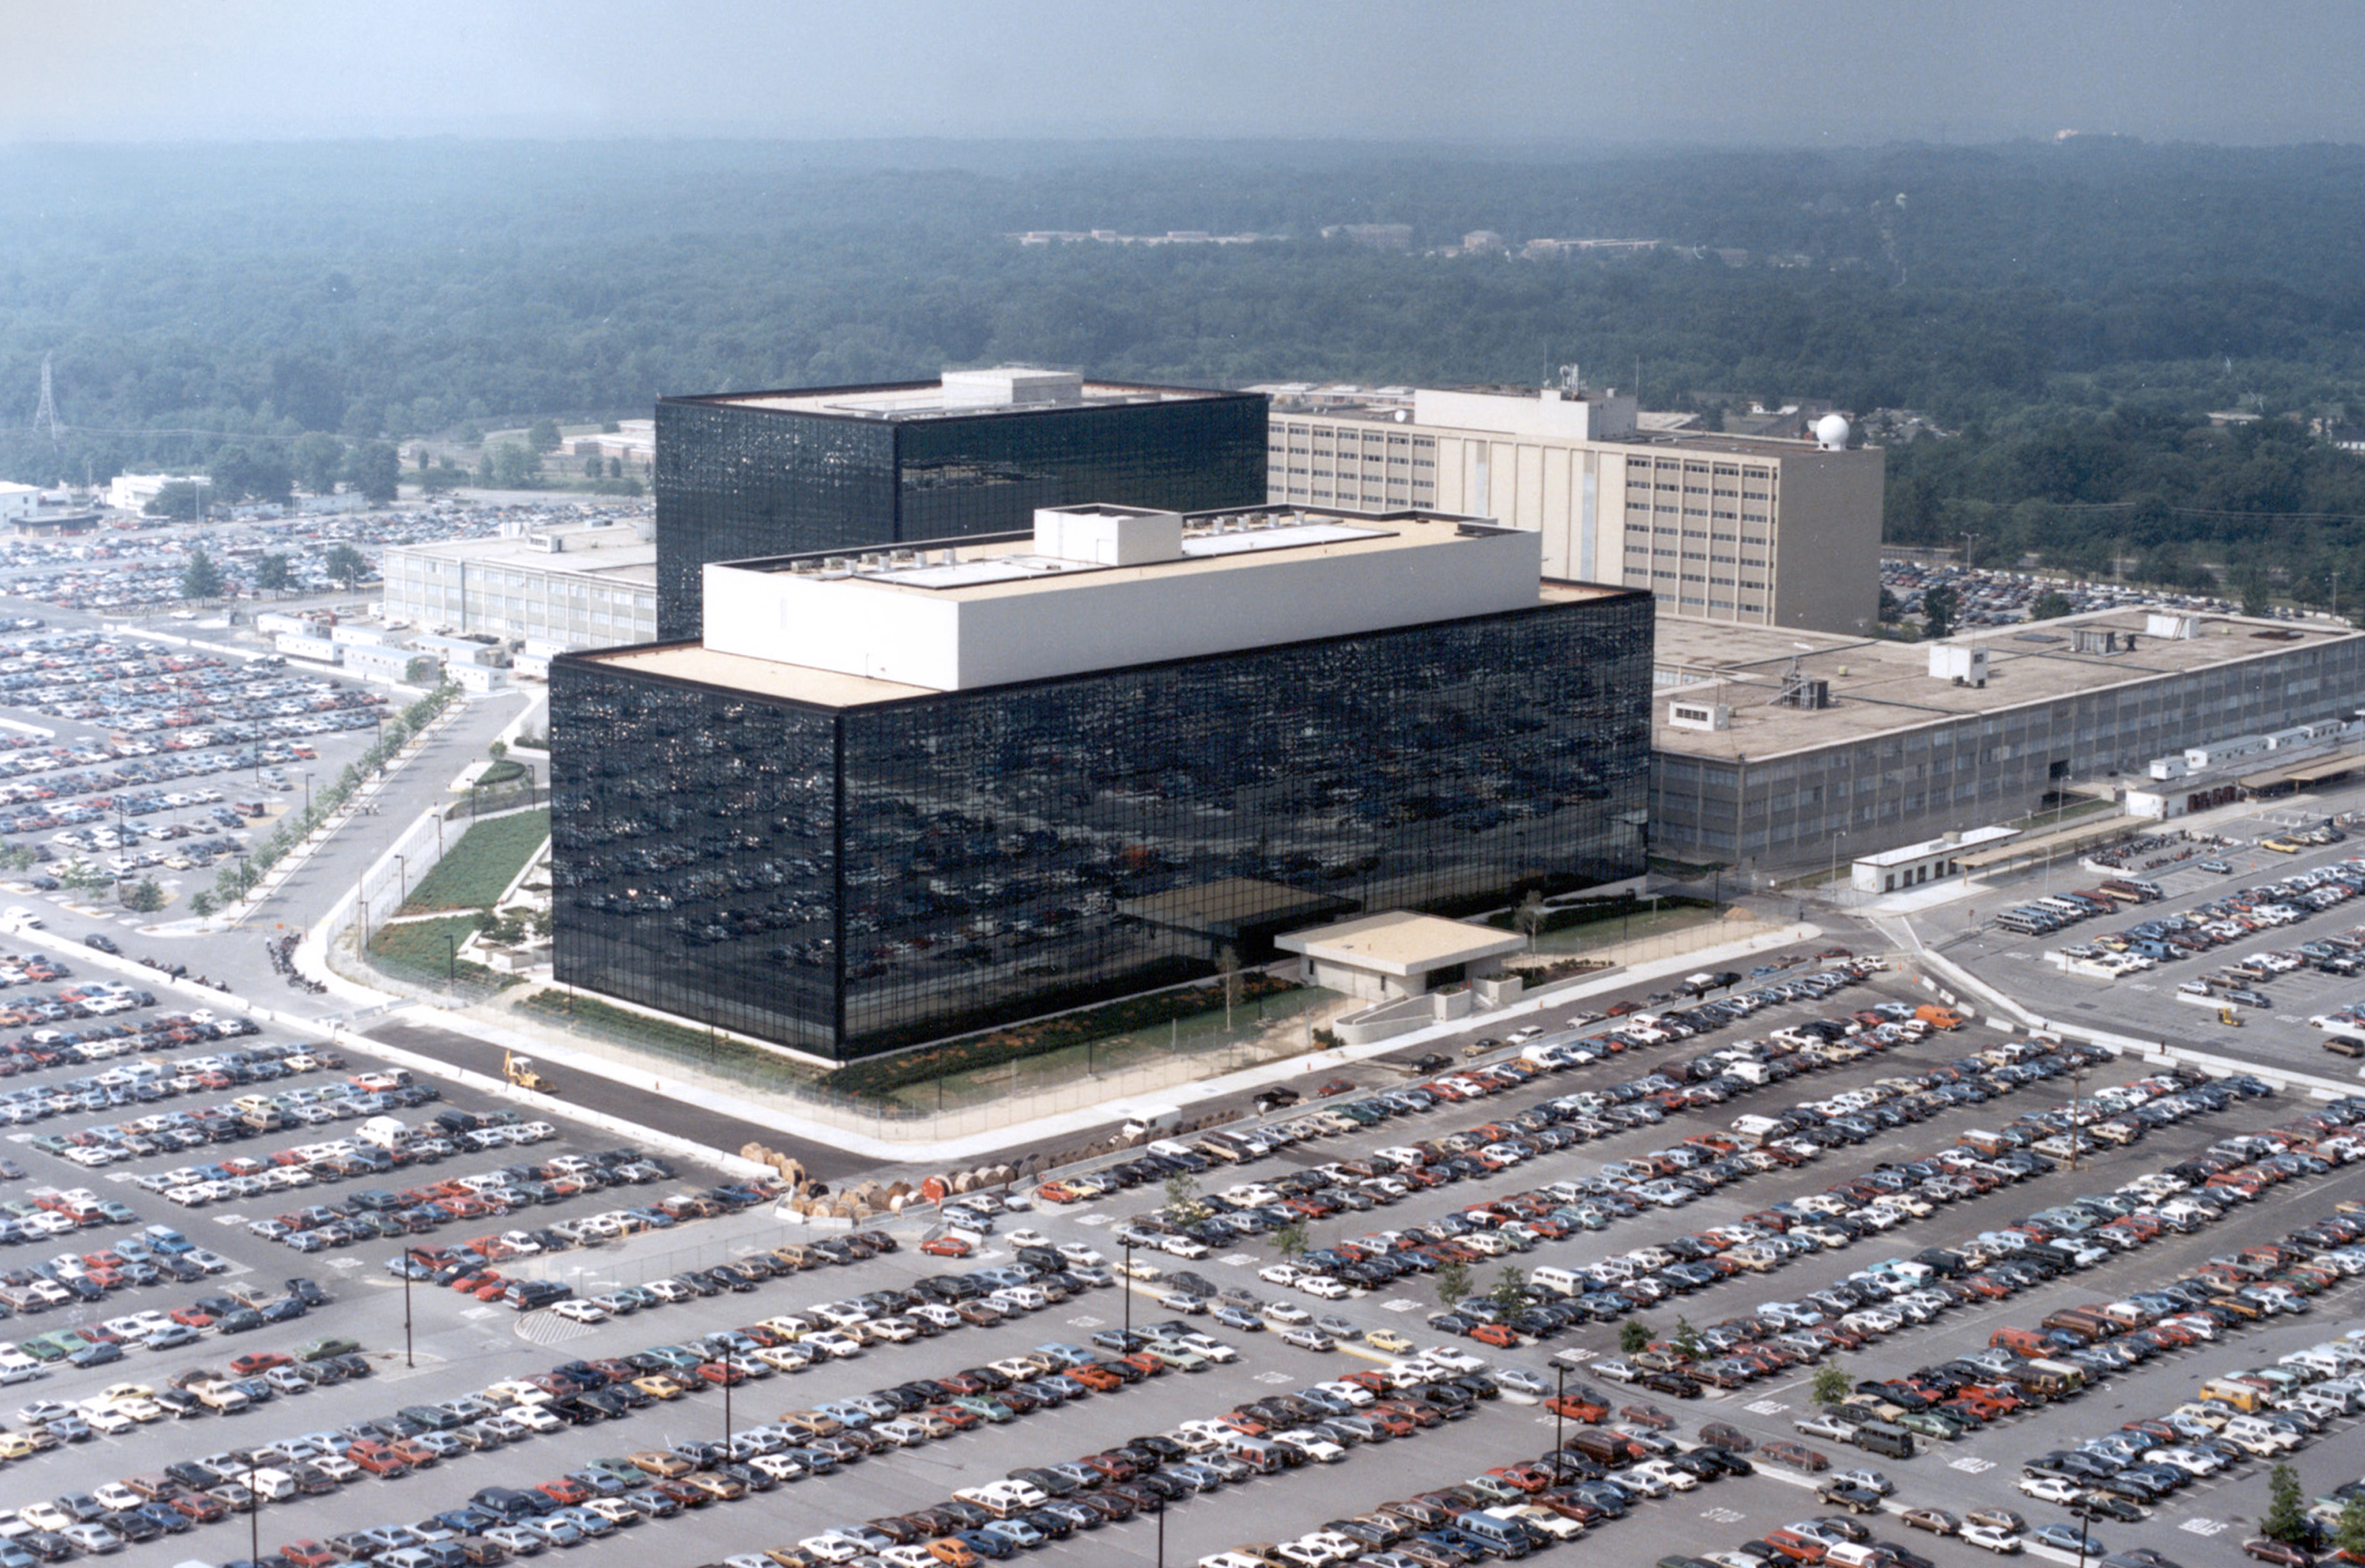 The National Security Agency headquarters building in Fort Meade, Md. (Reuters)